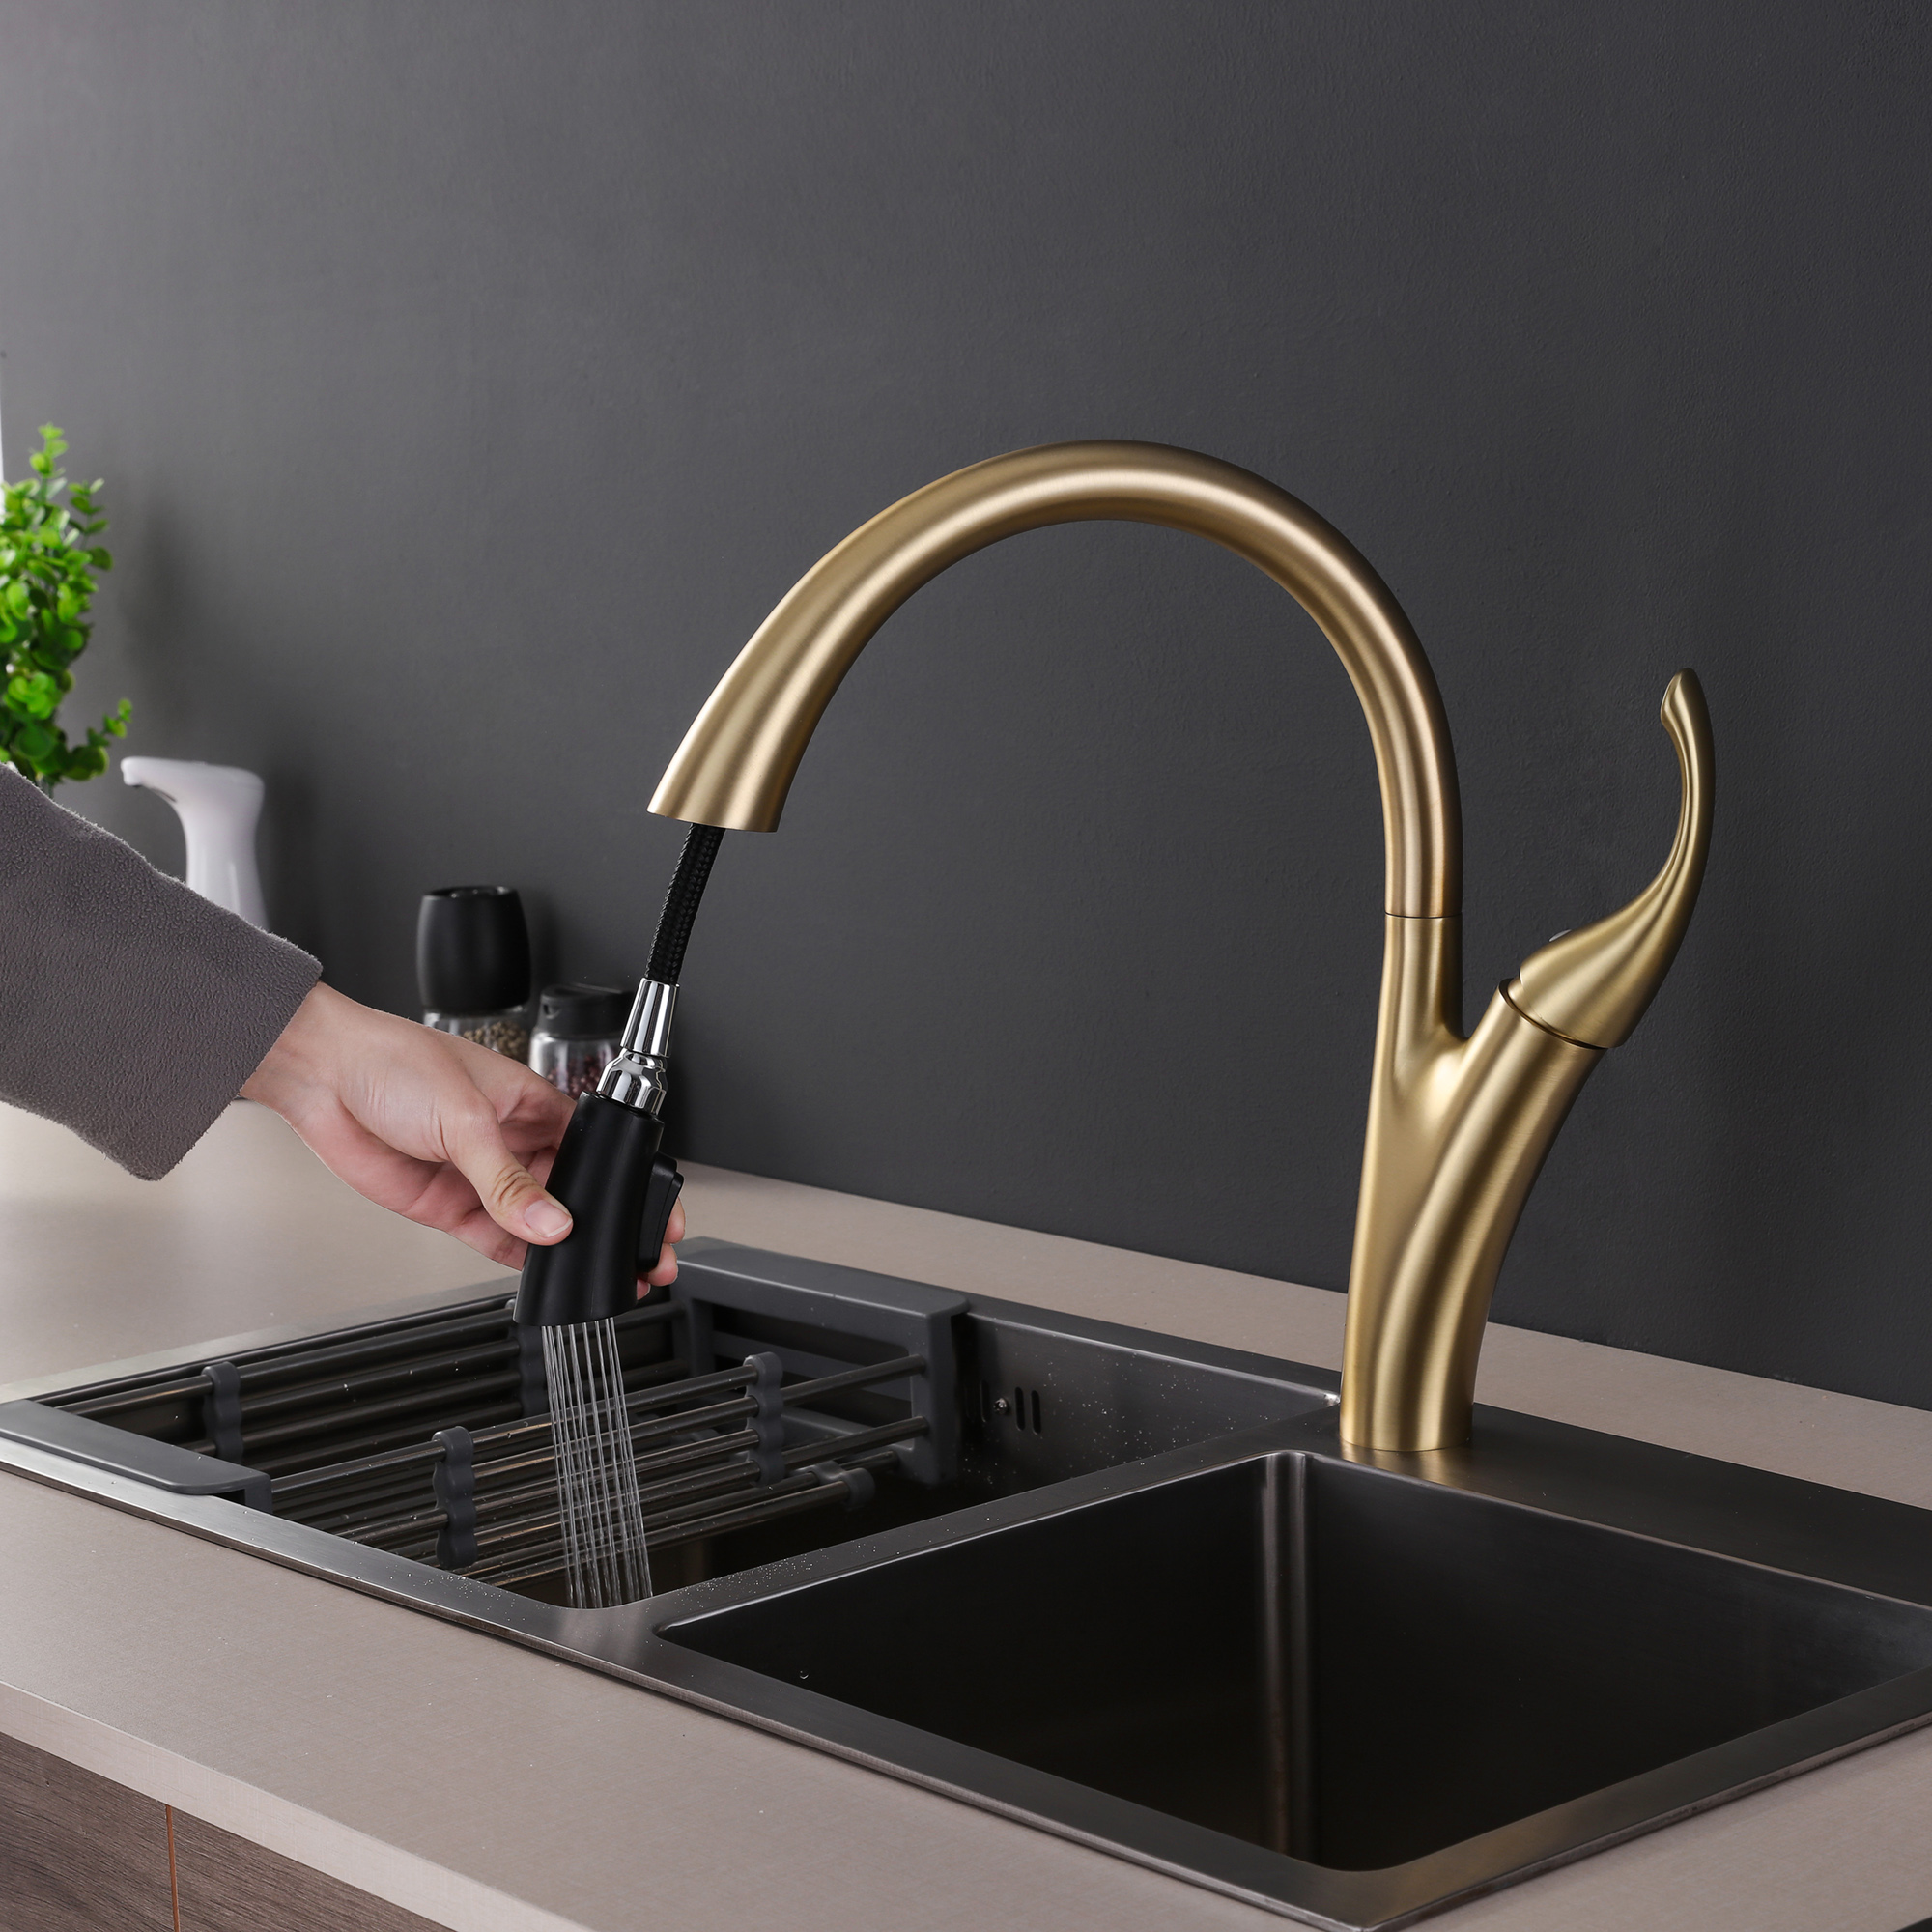 Brushed Gold Brass Material Pull Down Kitchen Faucet Mixer